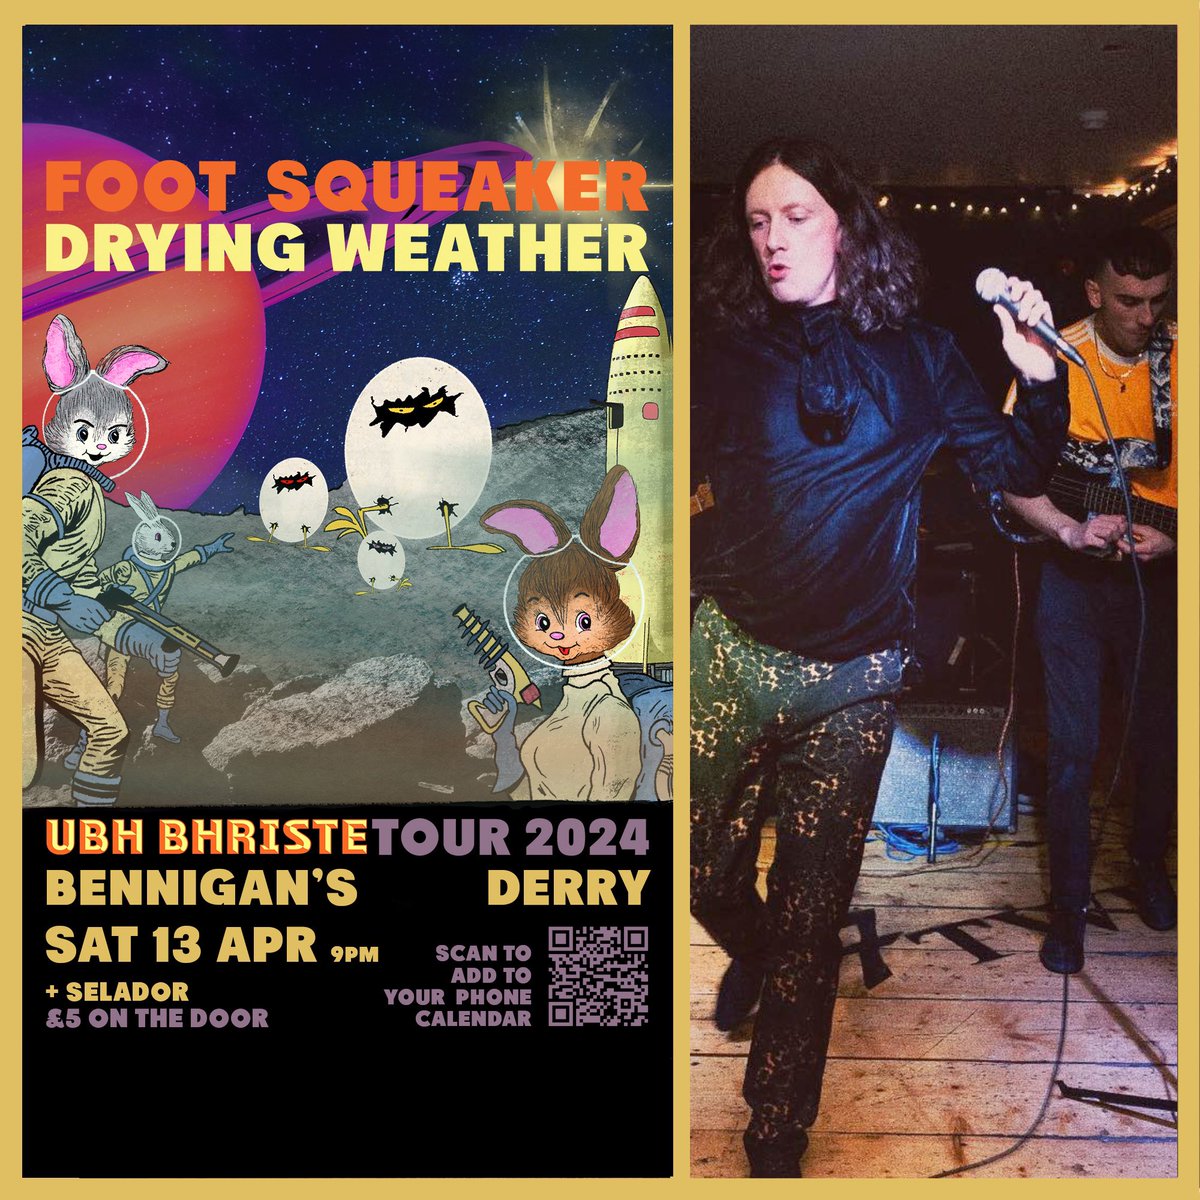 Derry this is the last show of the Ubh Bhriste tour this Saturday April 13th in Bennigans Bar with legends @DryingWeather we want to go out with a bang. Bring your moshing boots. Doors 9pm. Adm: £5 Guests: Selador #Derry #Derrygigs #irishtour